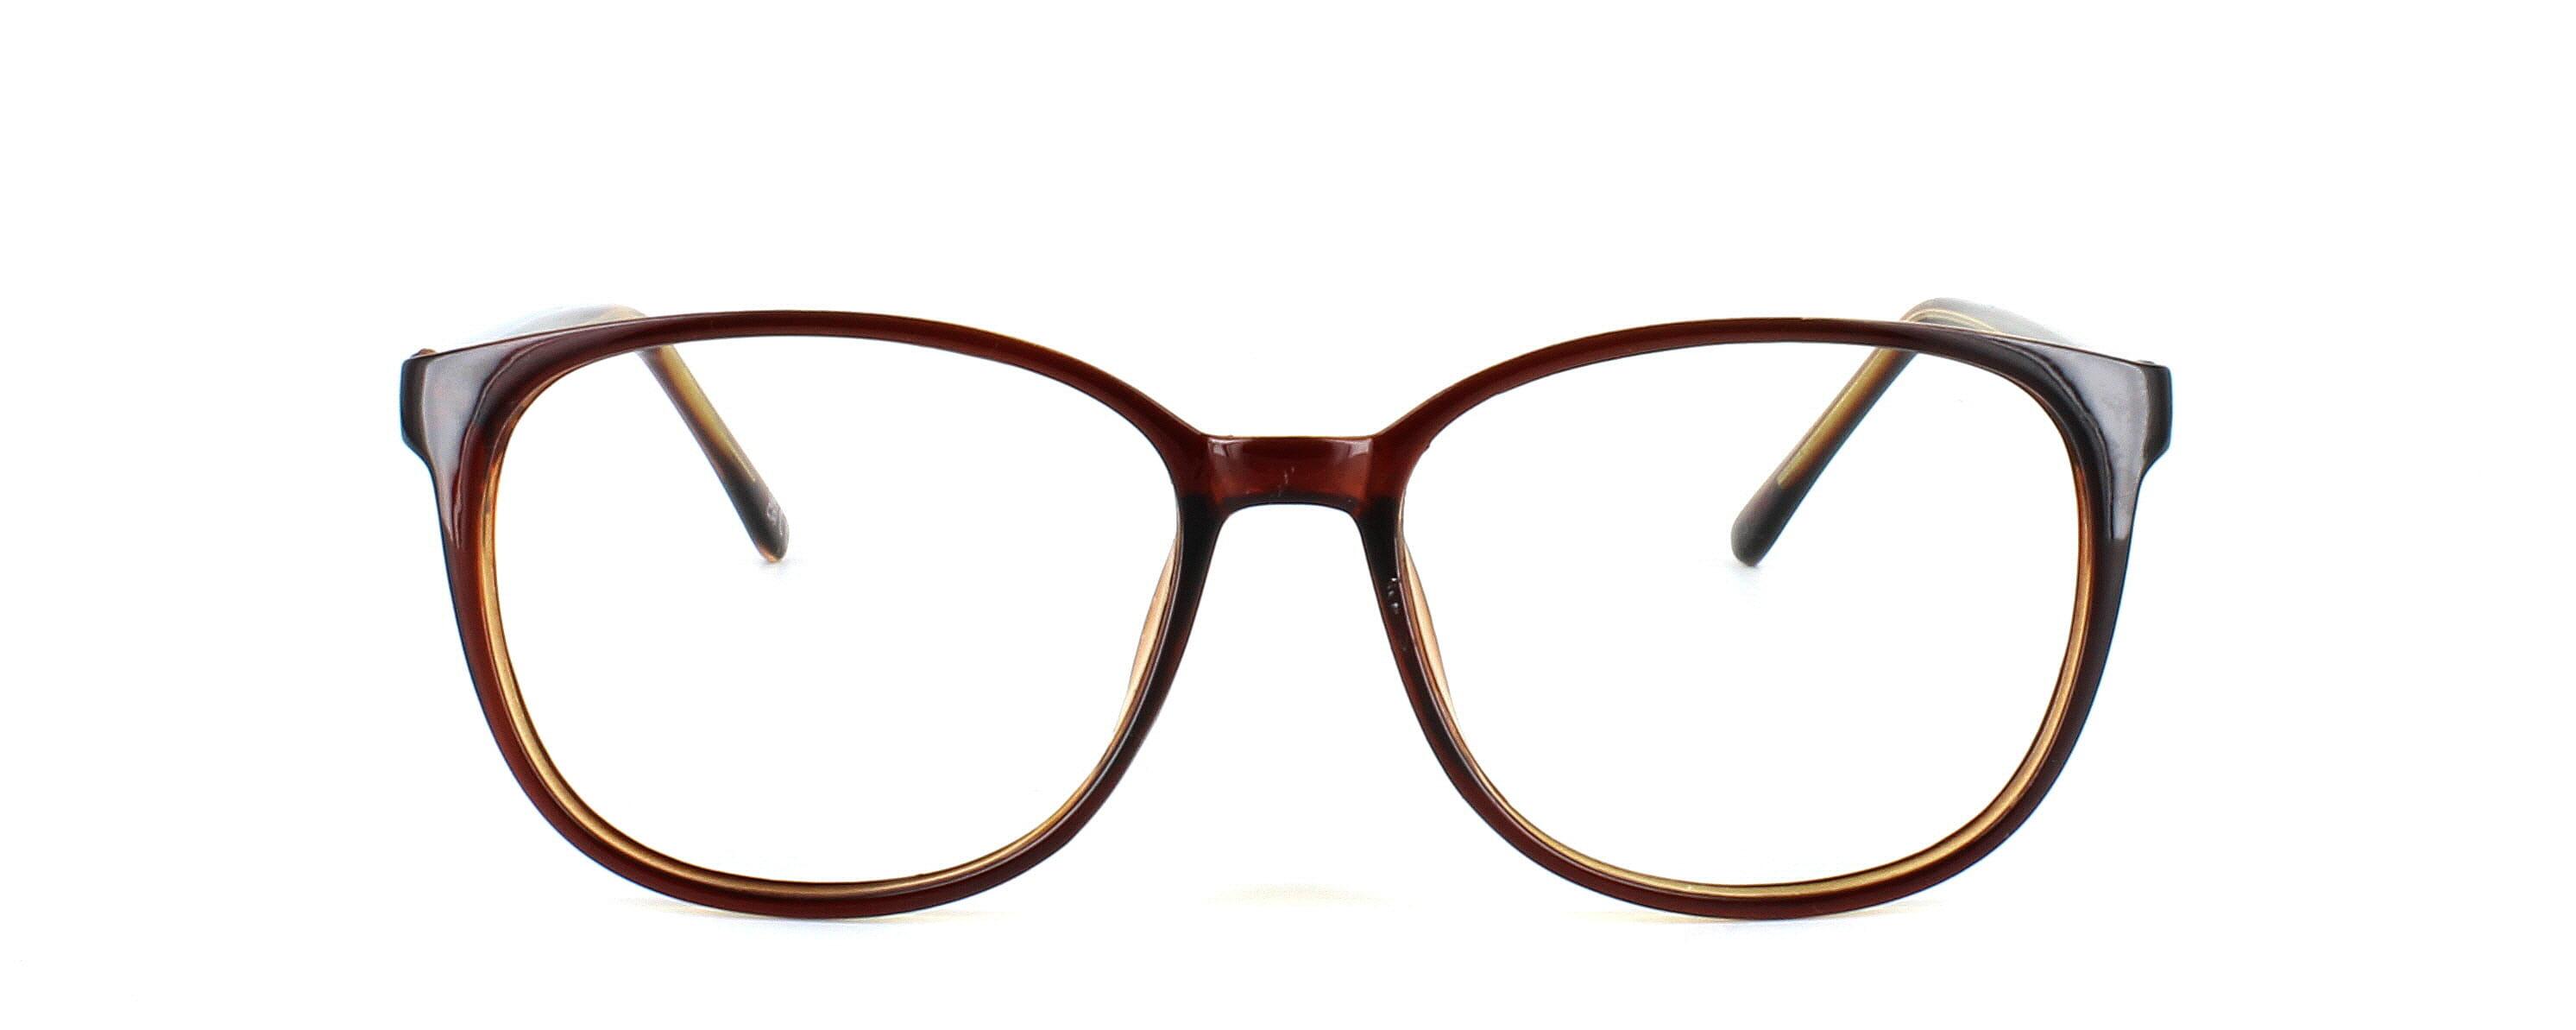 Como - Brown round shaped acetate glasses frame - image view 2